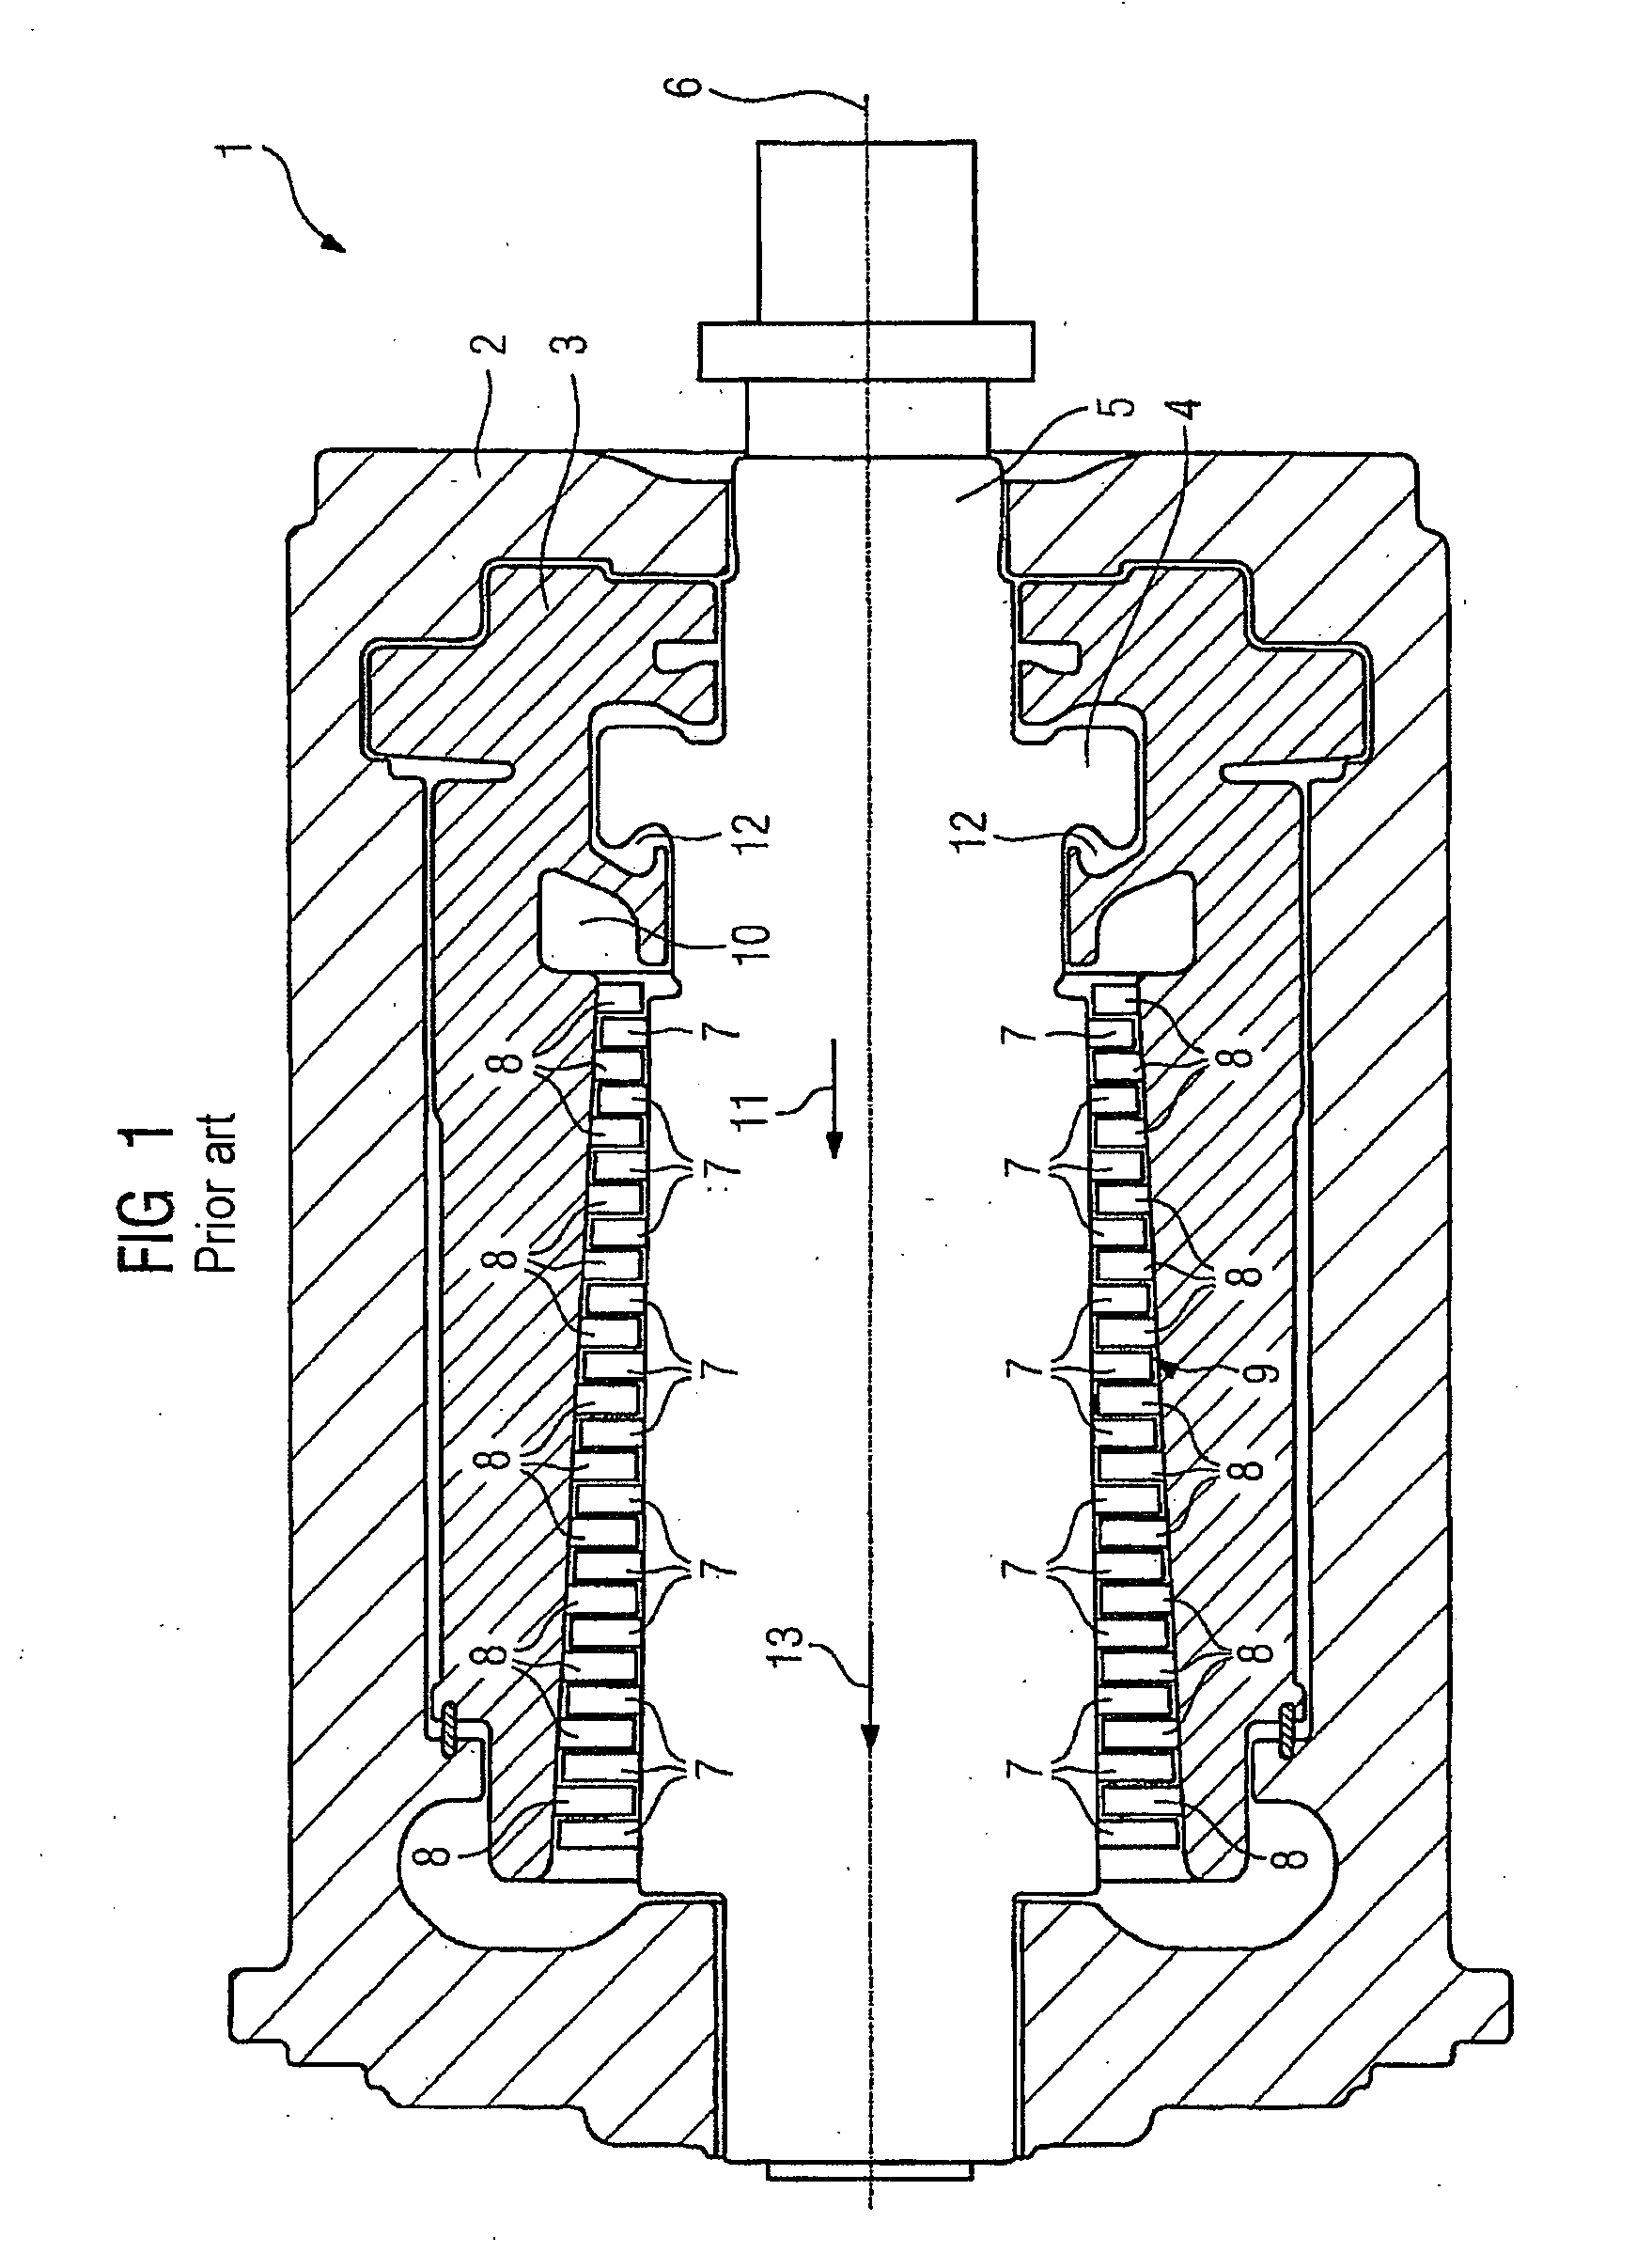 Steam Turbine and Method for Operation of a Steam Turbine